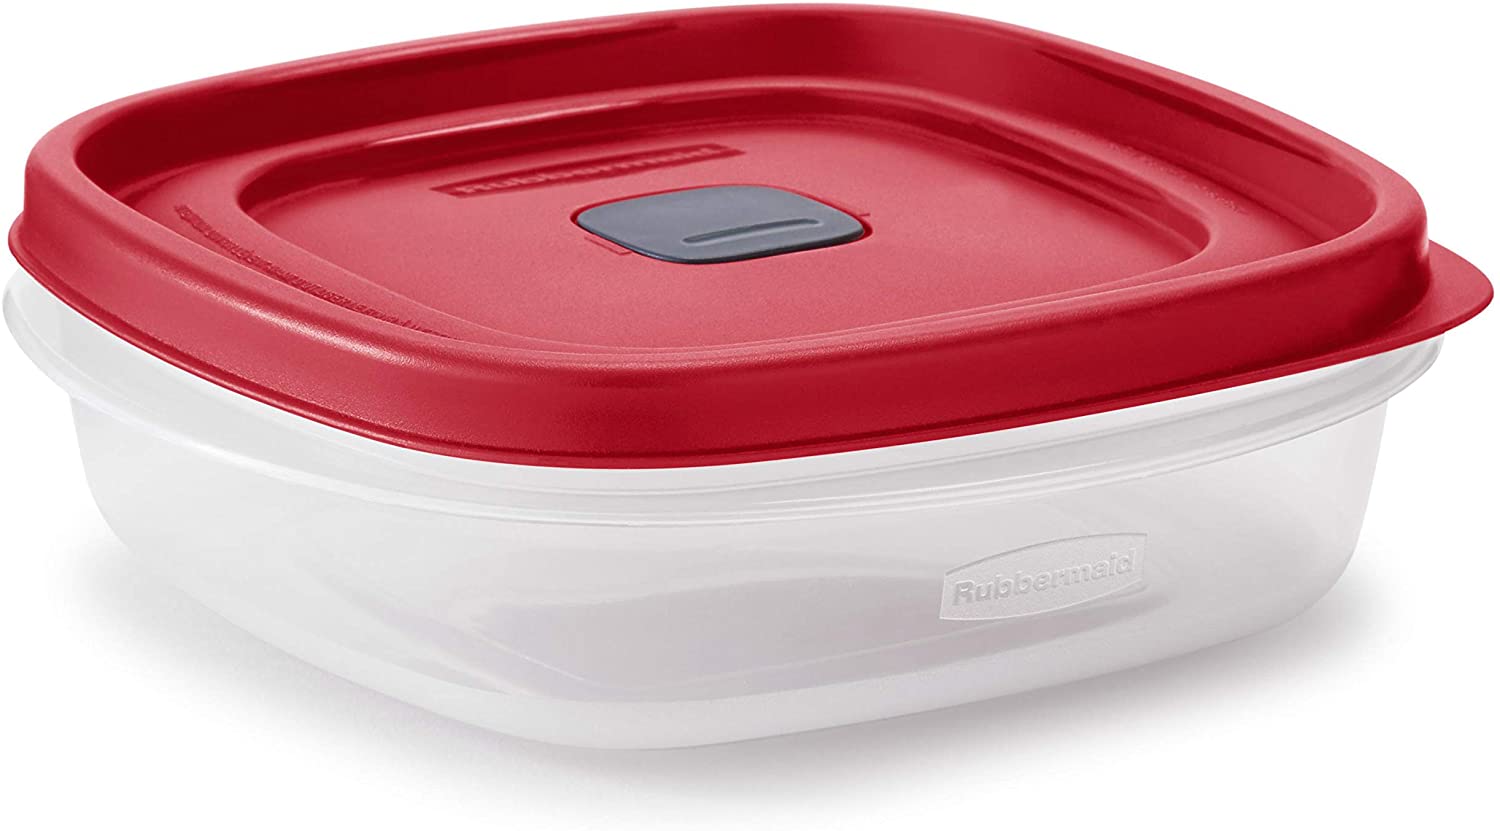 Rubbermaid Deviled Egg Keeper Tray Food Storage Red Container Hold 20 Jumbo  Eggs